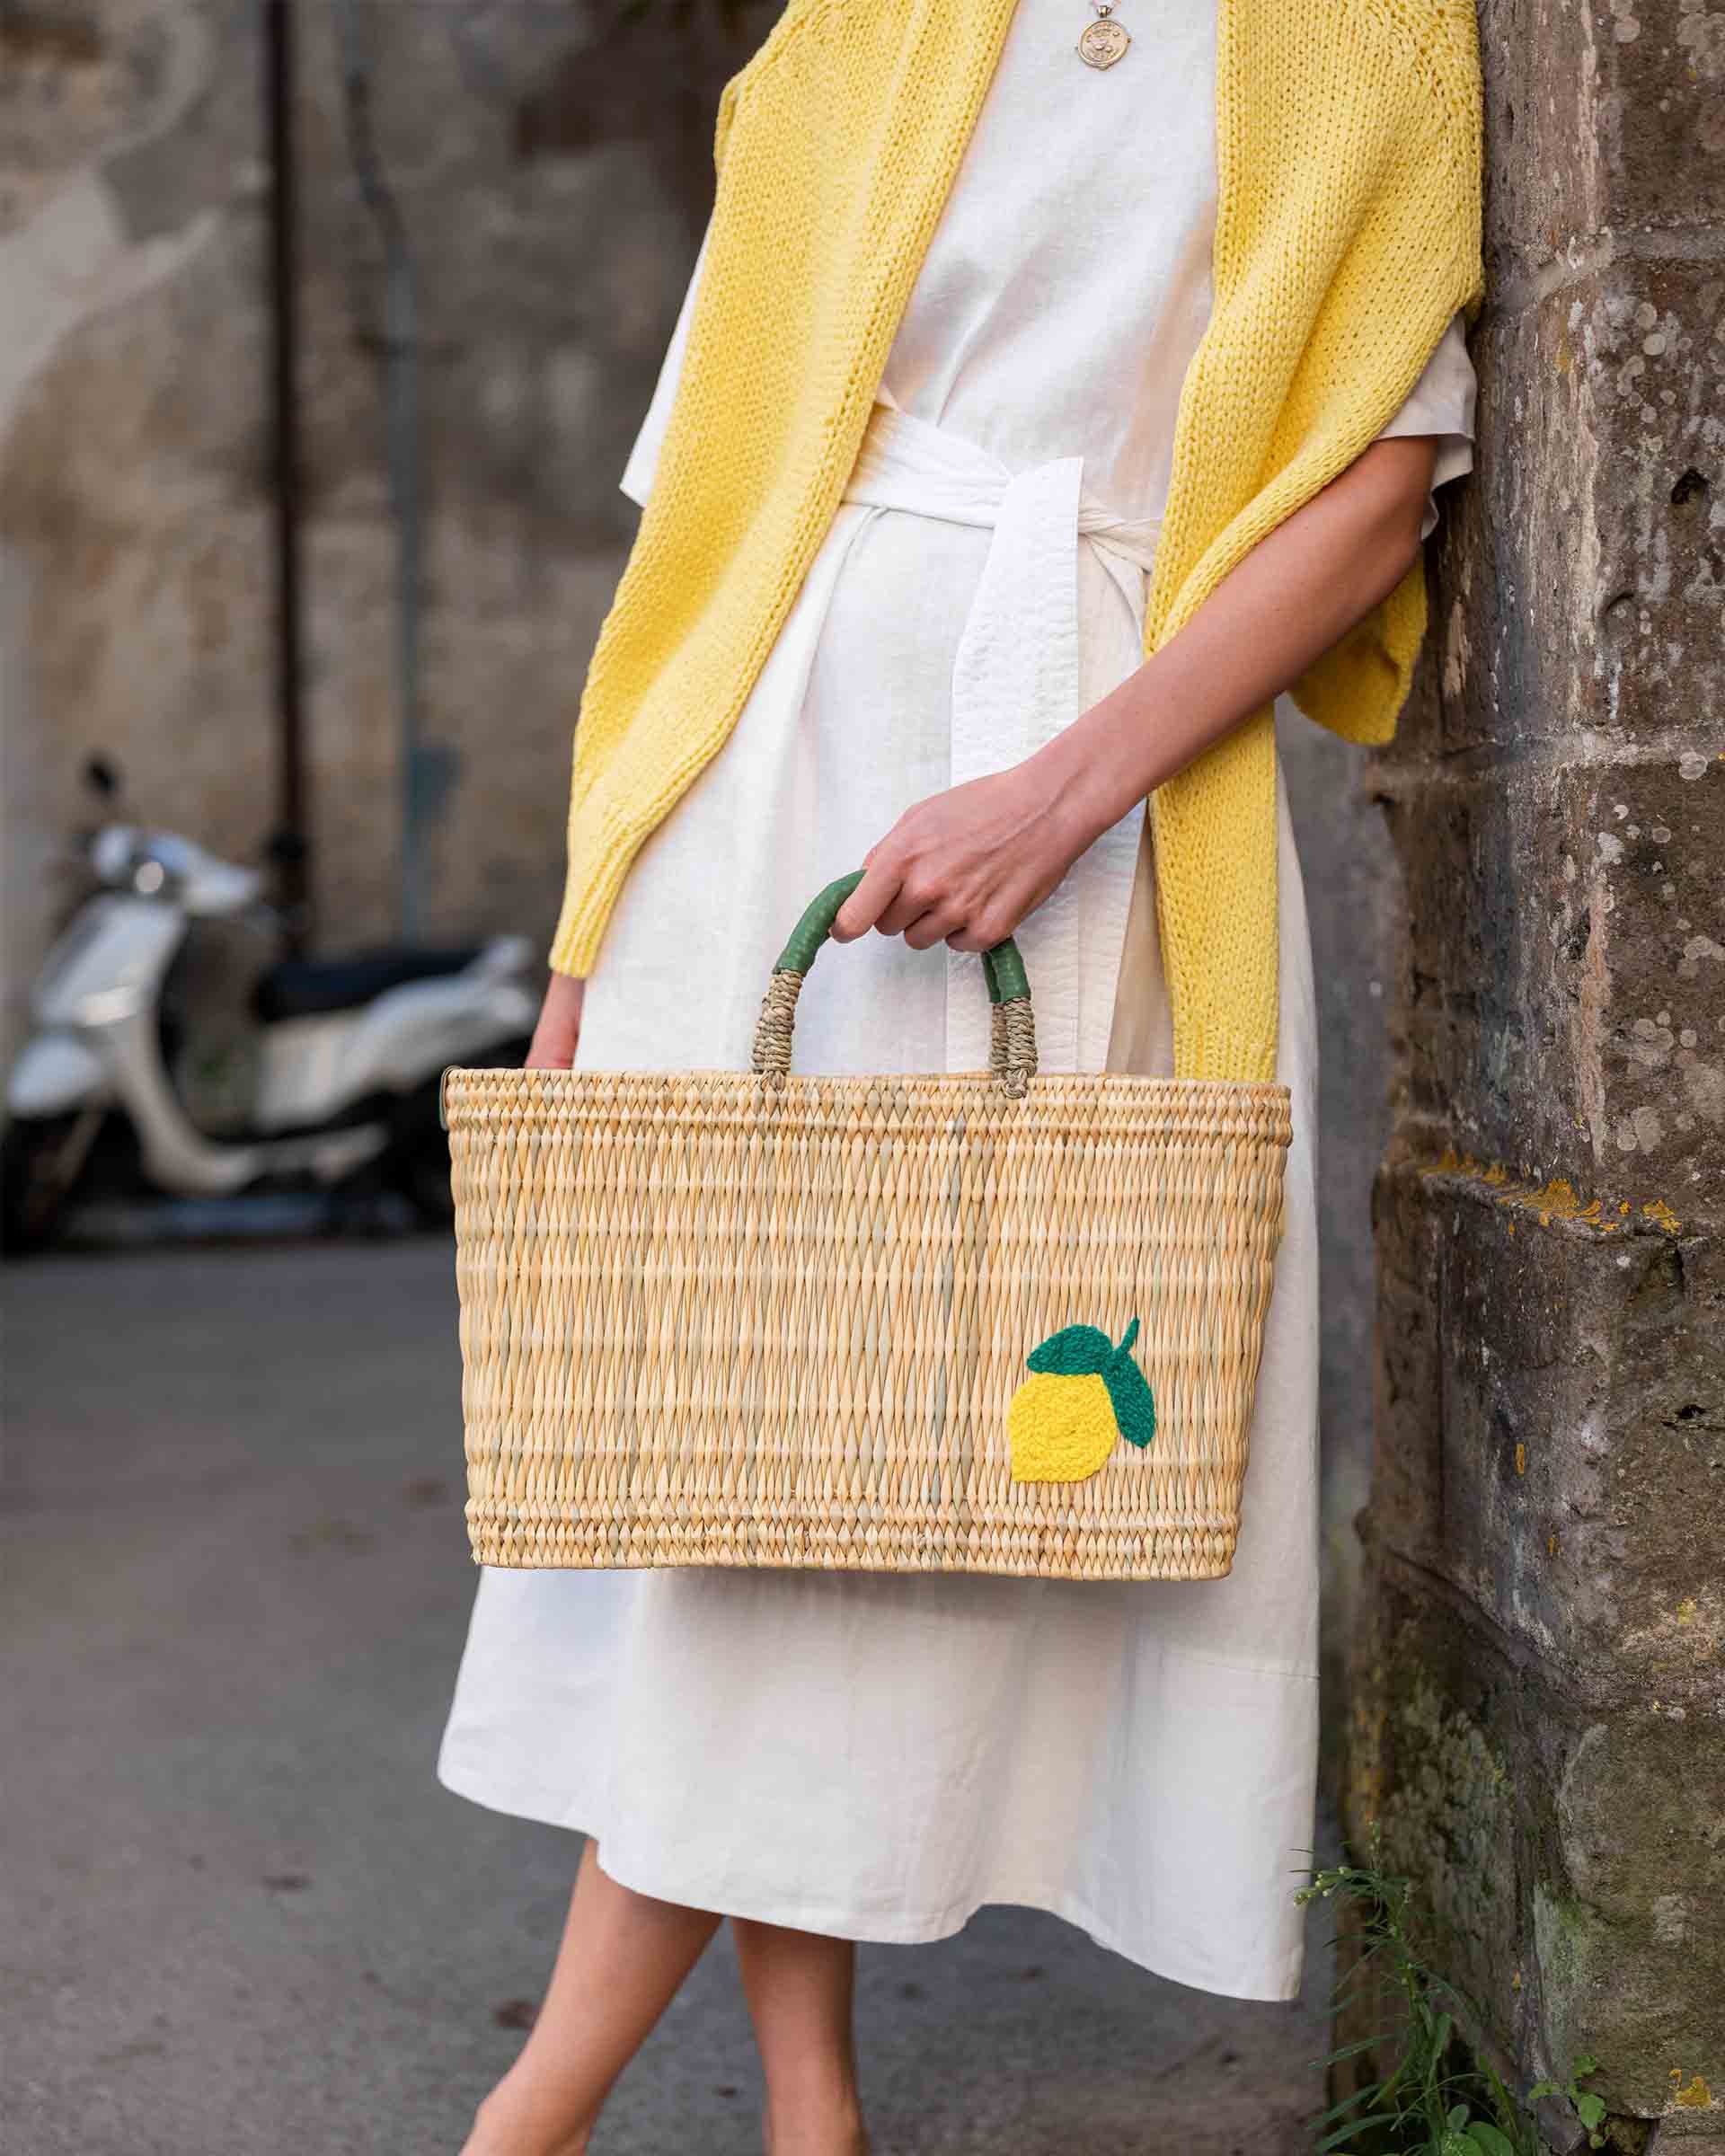 female holding medium sized straw basket with handwoven lemon leaning against a wall in the street